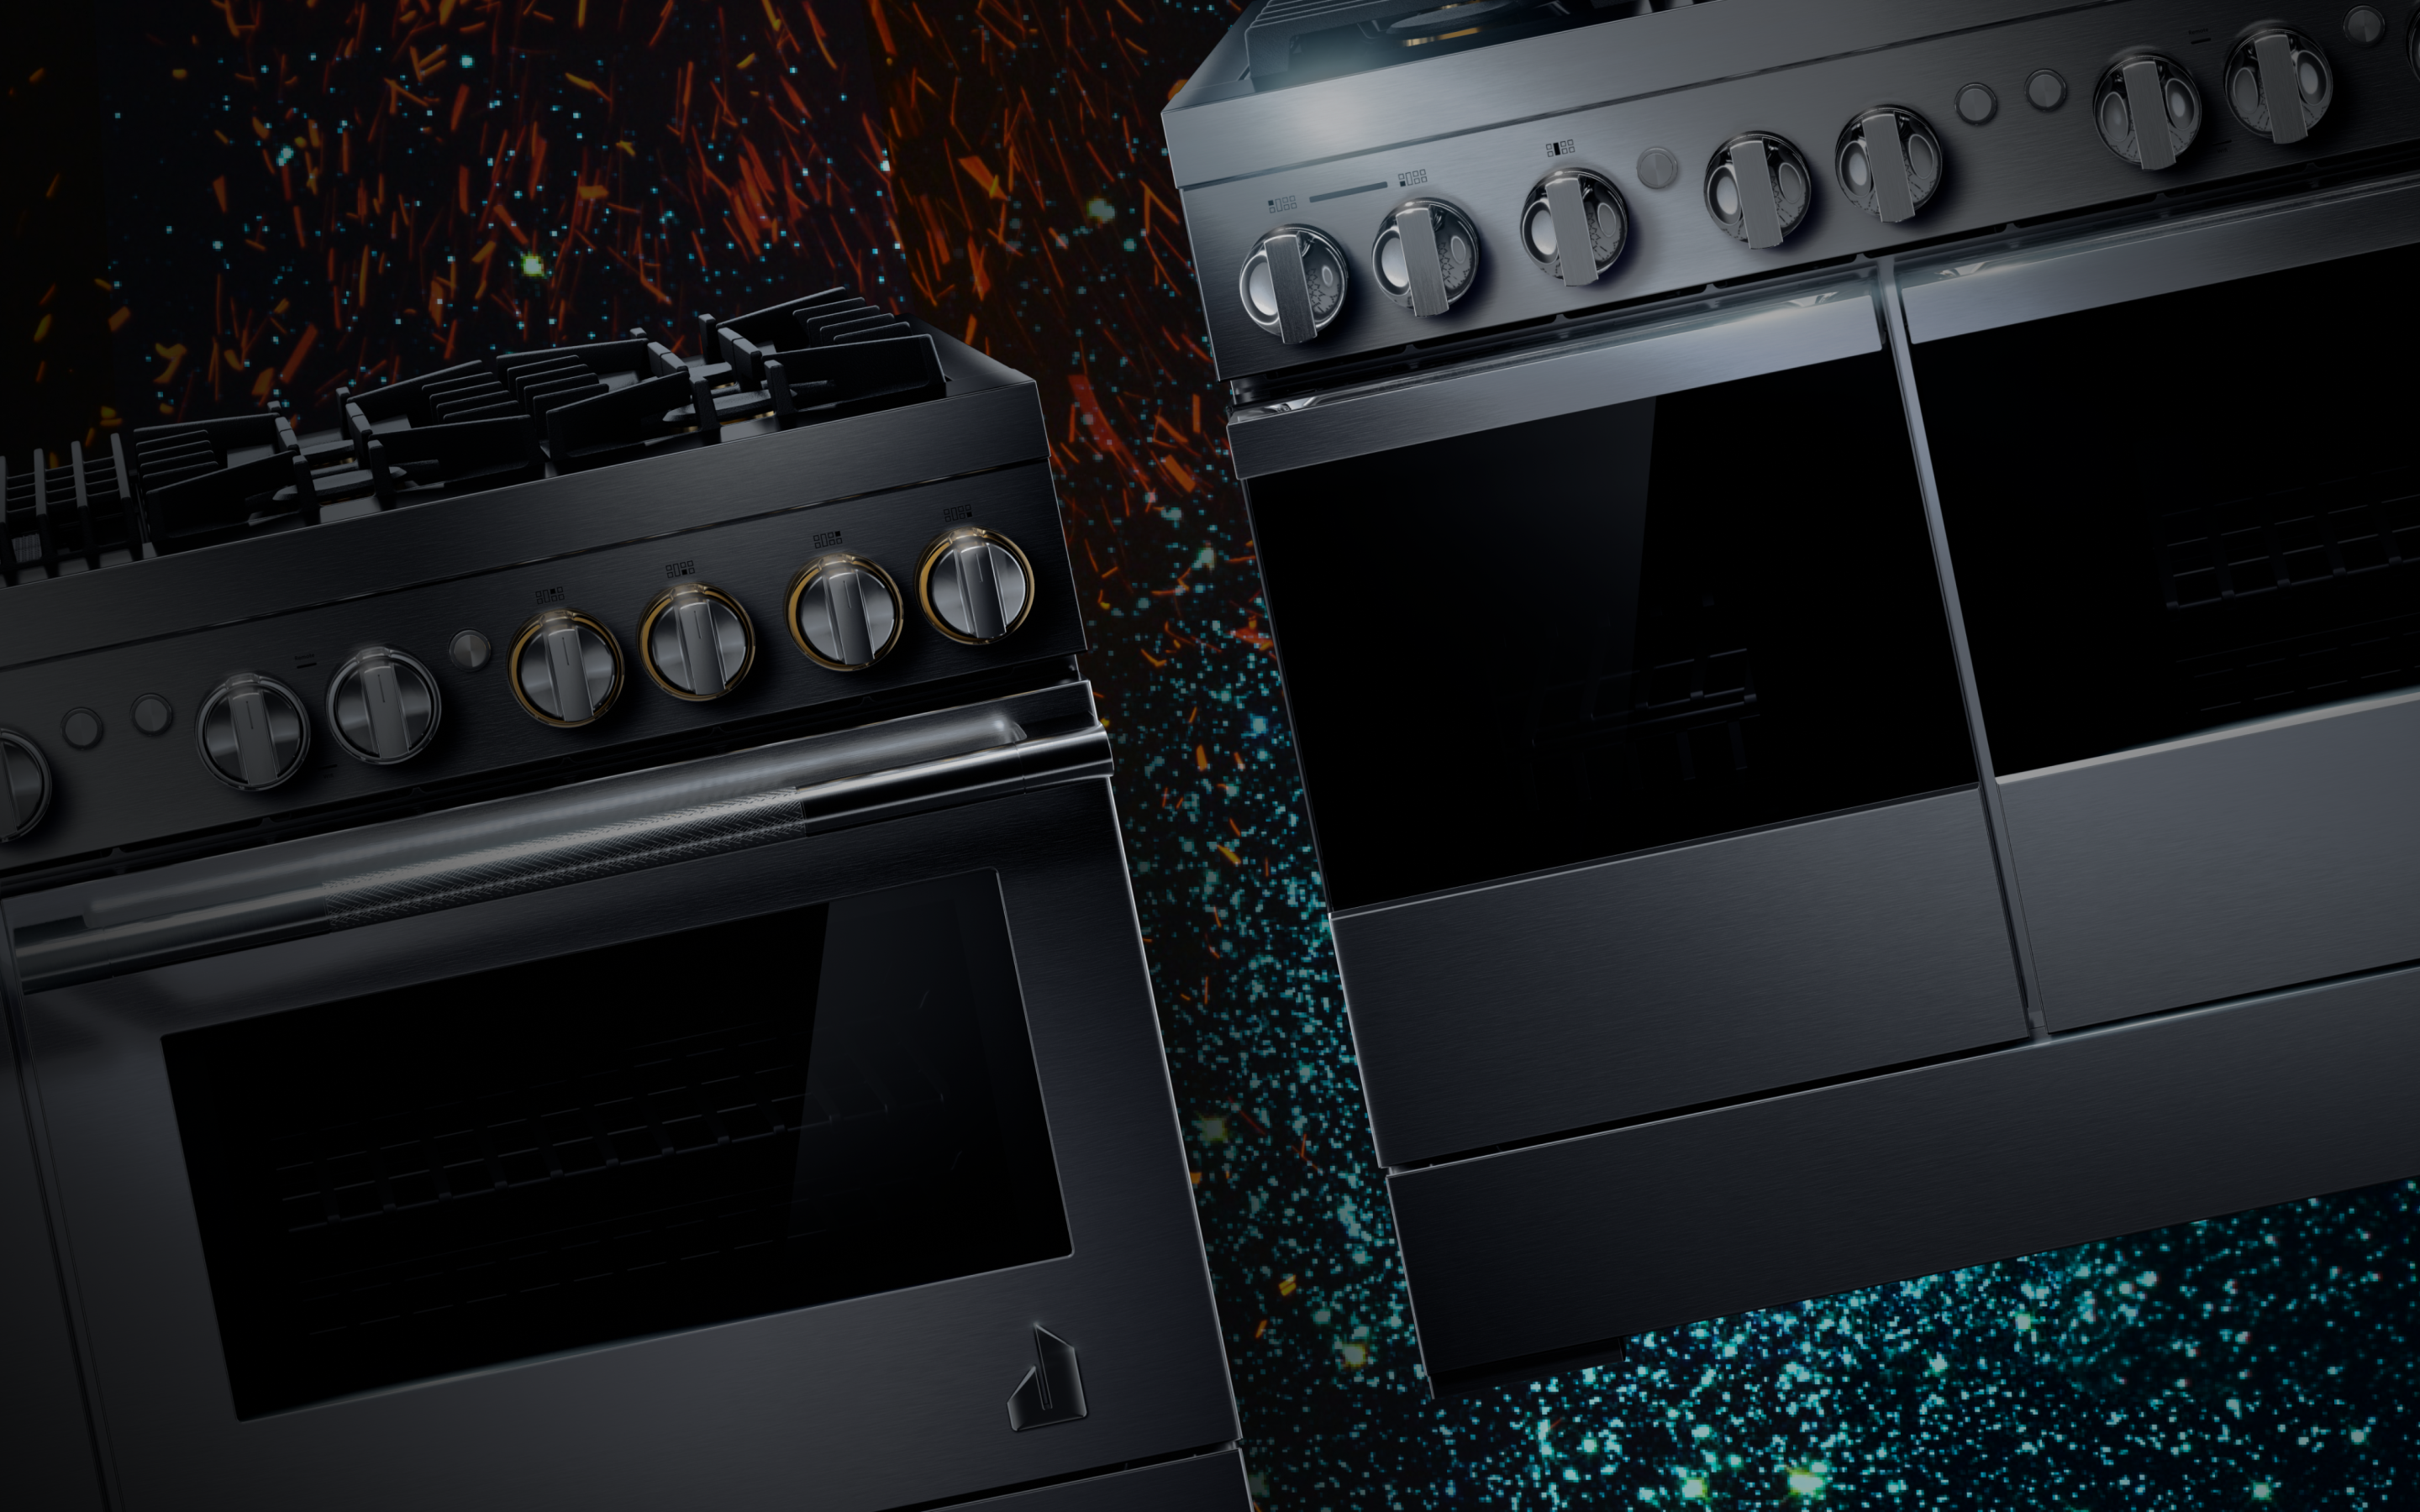 Two JennAir brand range appliances in different styles.